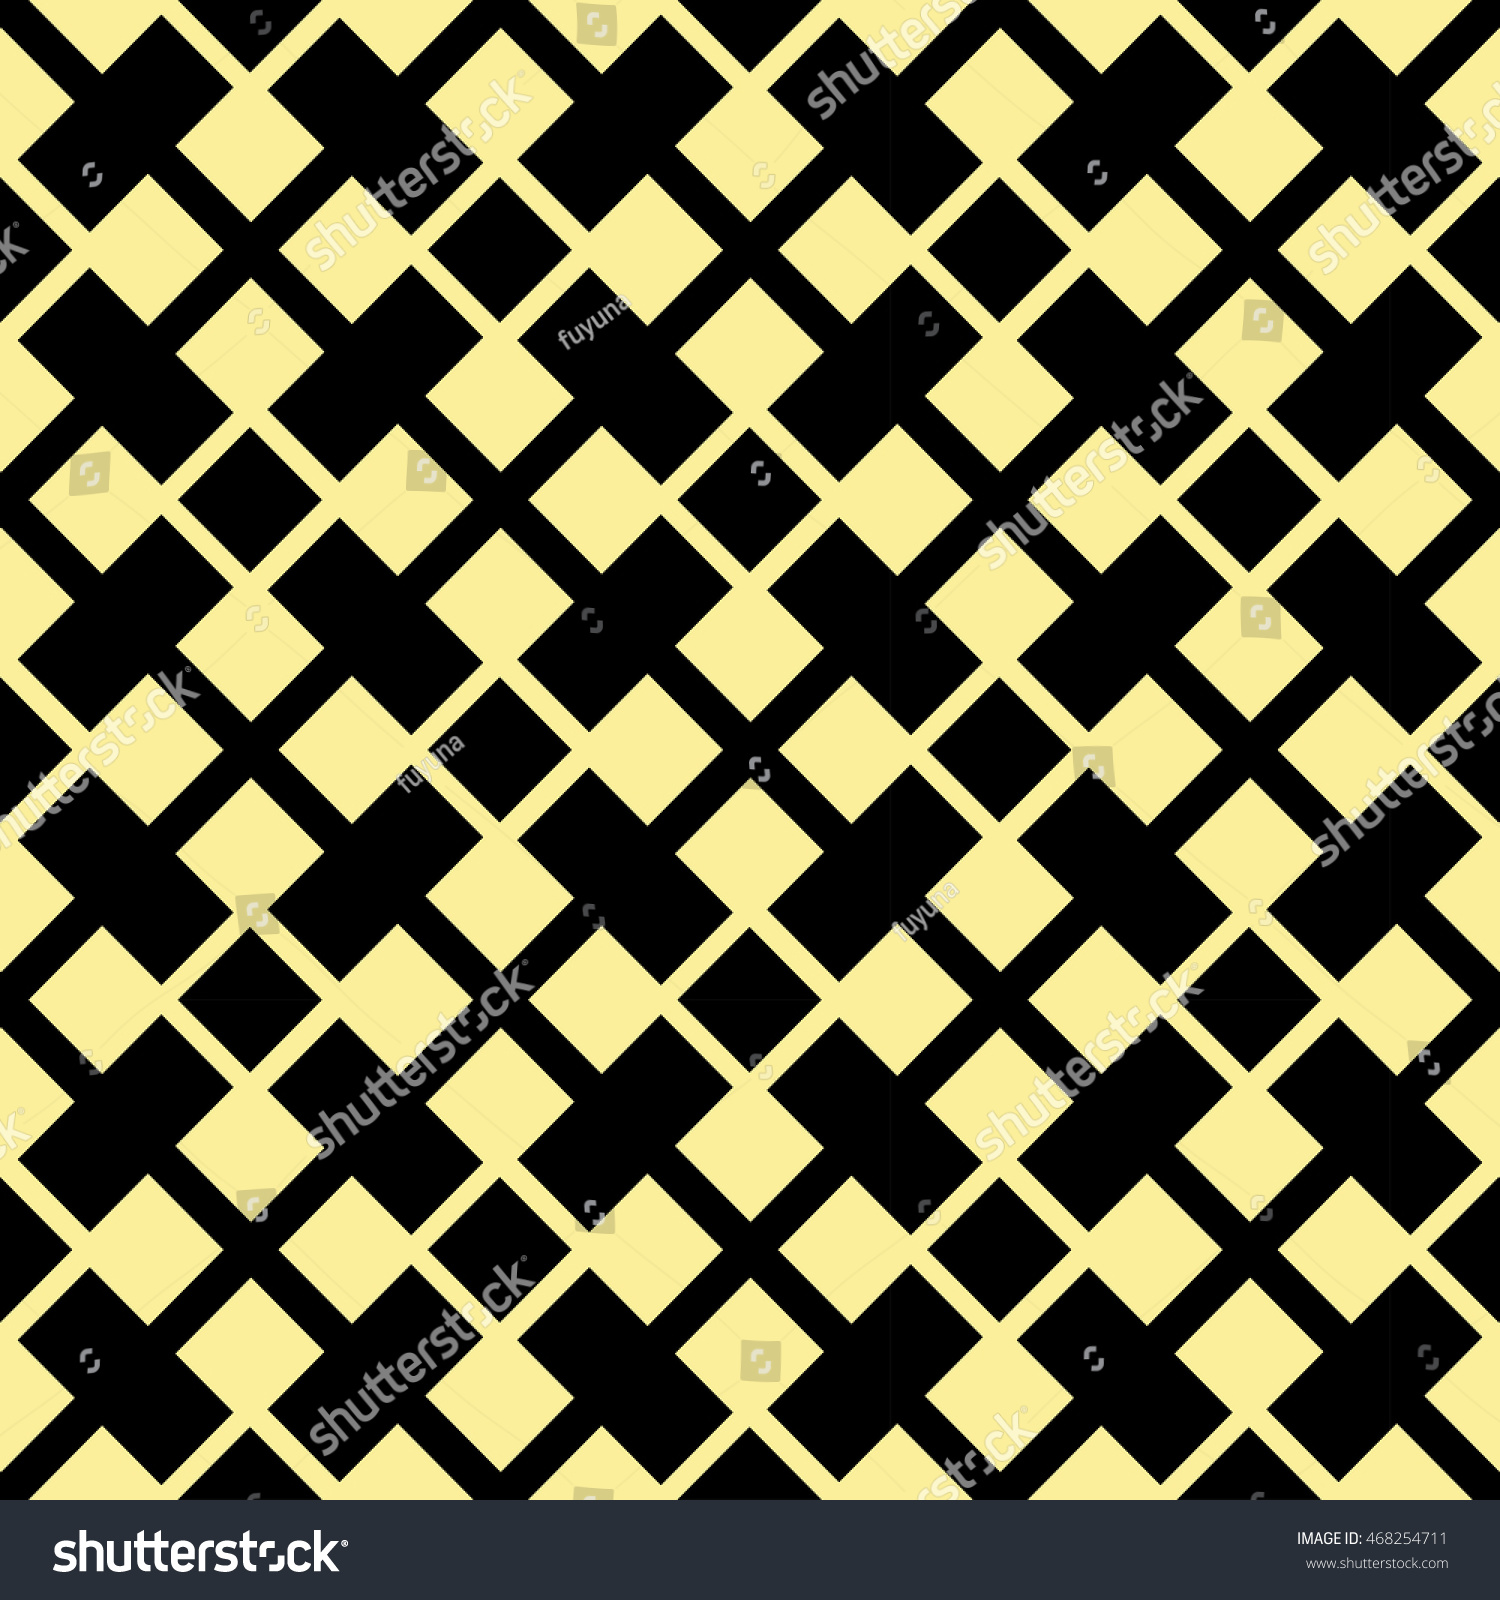 Plaid Square Checkered Pattern Seamless Rectangle Stock Vector HD ...